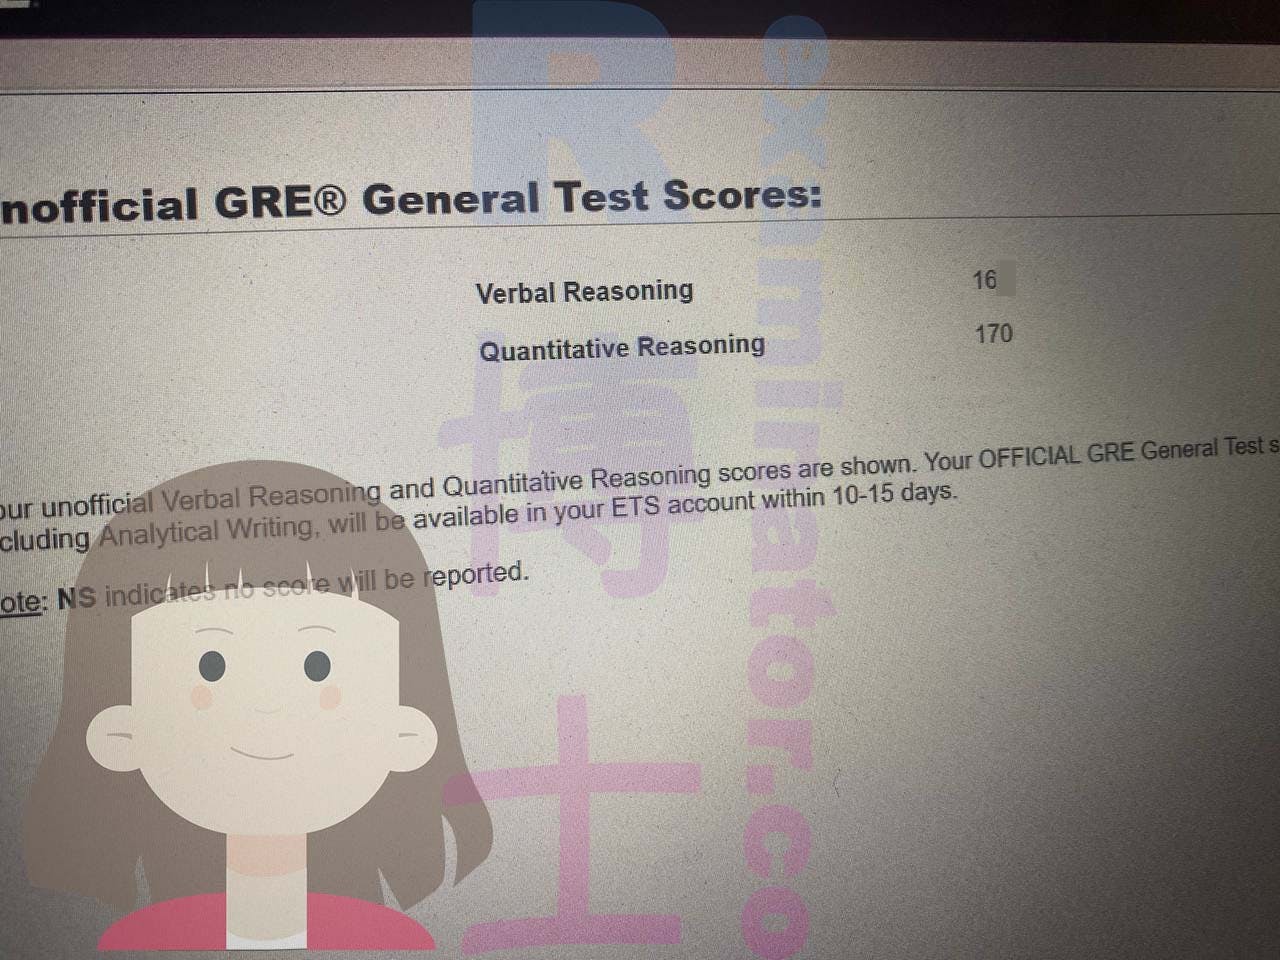 🇺🇸🐱 "Were there any issues with pets at home? I have a cat that meows a lot." 😅  Feline Meowing Mayhem 🐈: American Client Moves to Friend's Place for Peaceful Test! 🏡  Proxy Testing Expert Help Leads to GRE Success: Client Scores Amazing 33X! 🎉🥳